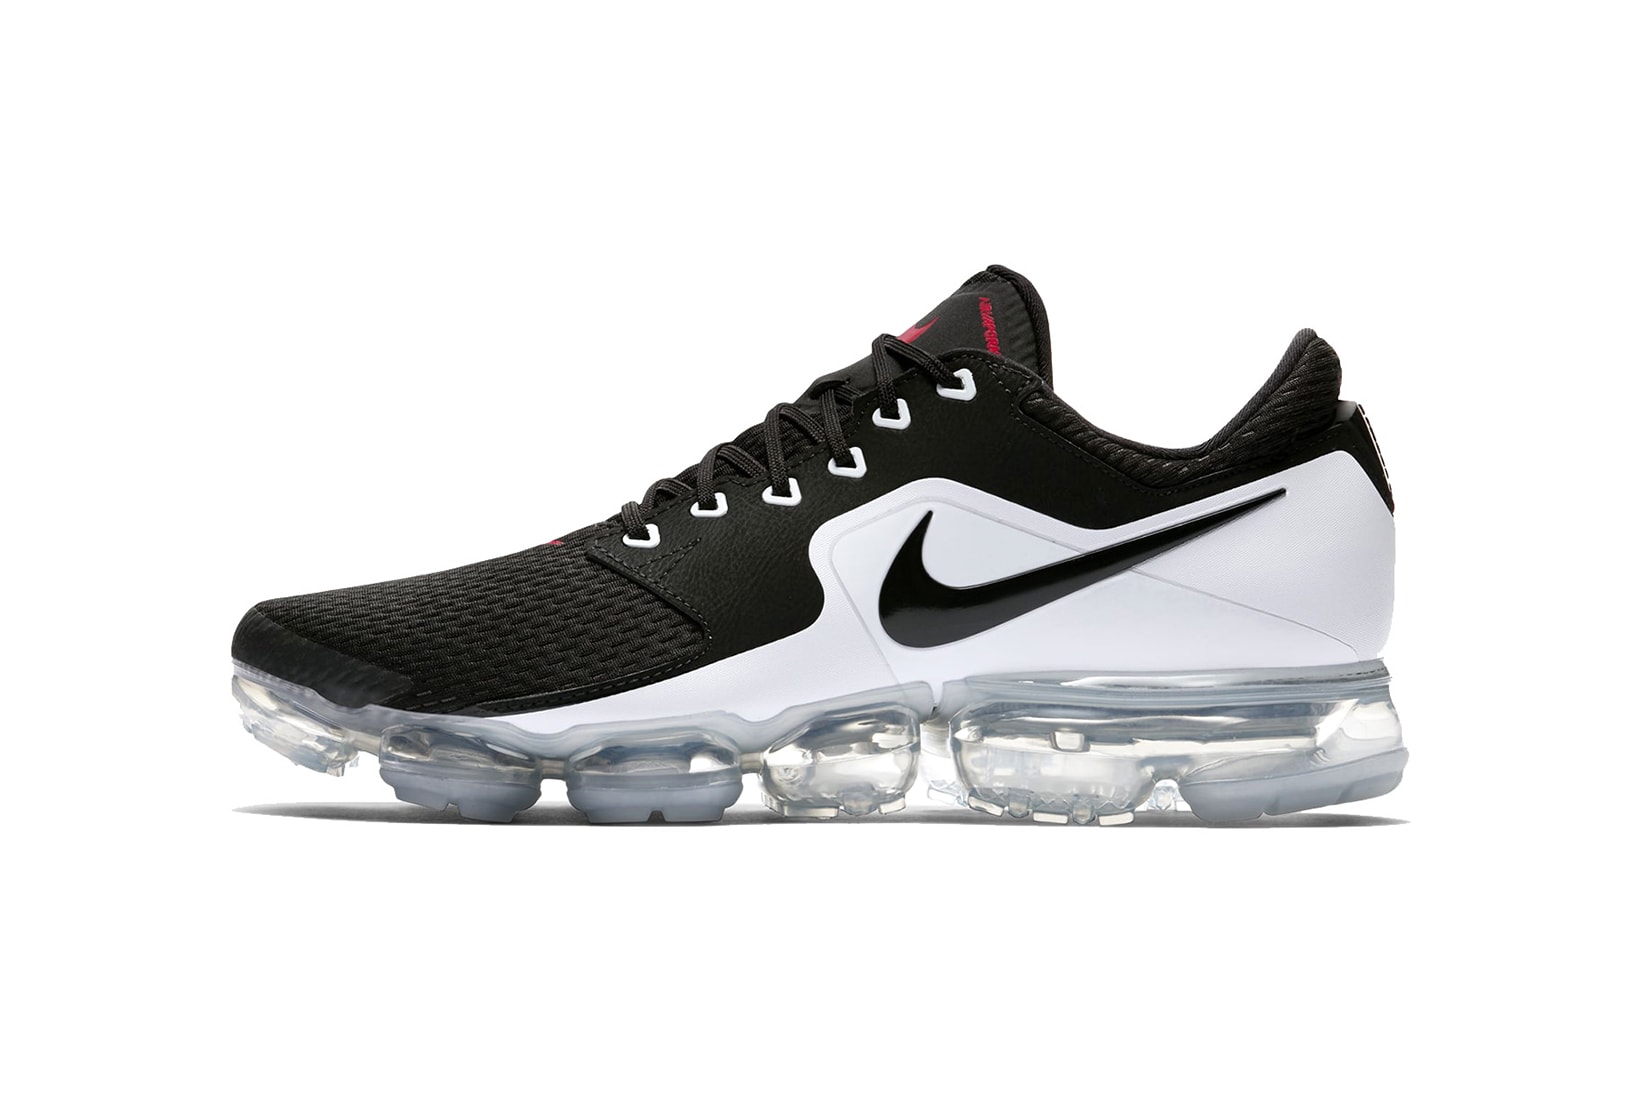 Nike Air VaporMax CS White Black Red First Look 2017 December Release Date Info Sneakers Shoes Footwear clear translucent sole air bubbles